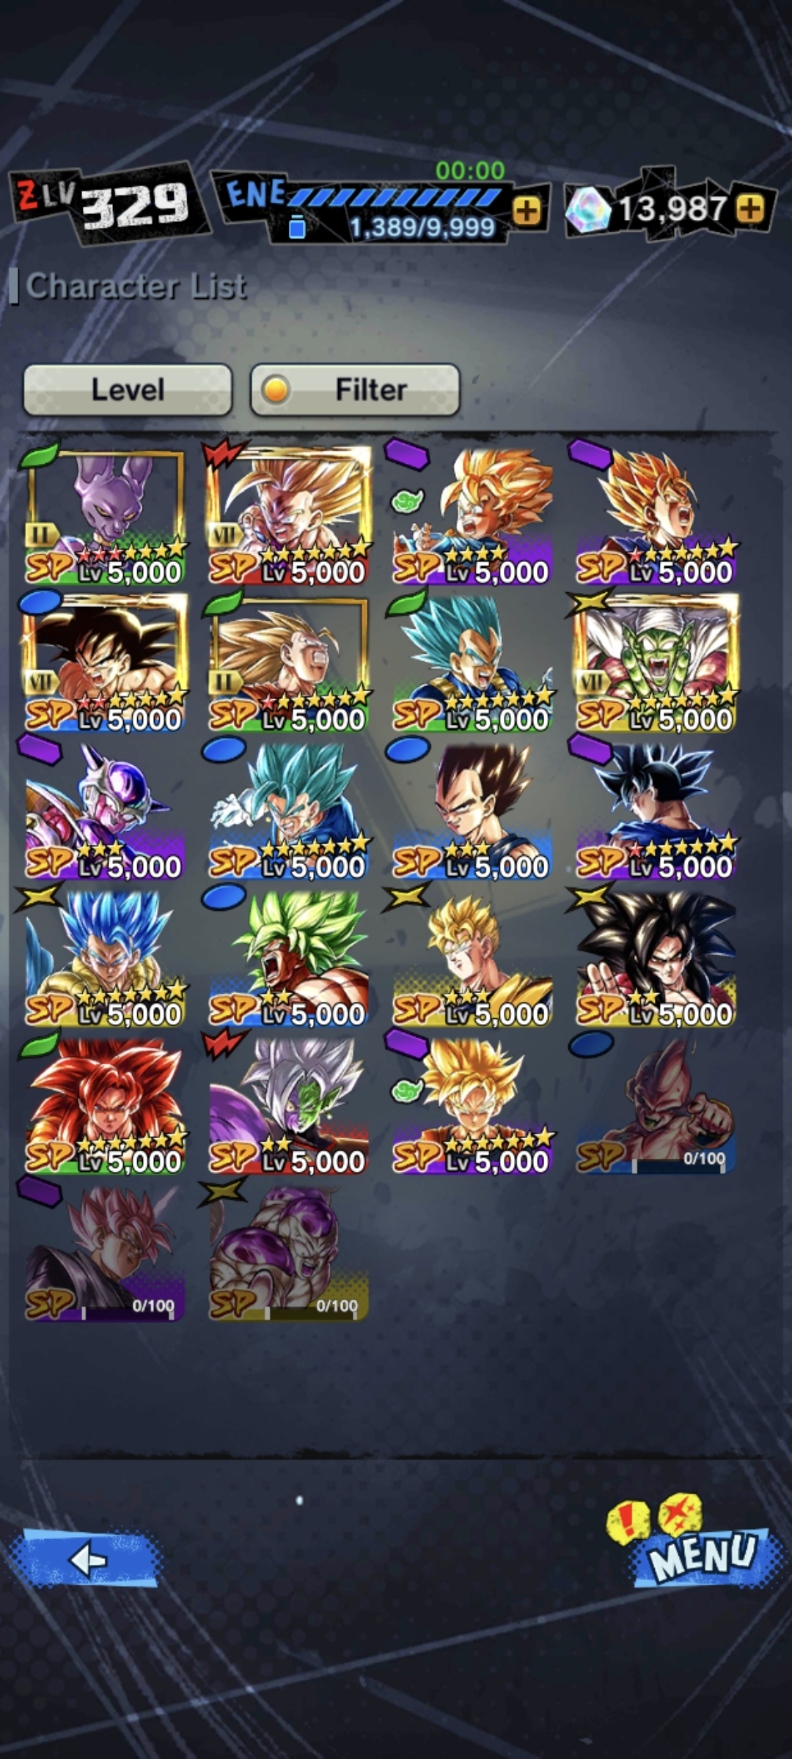 Selling - LV329 End-game Account. LF RevivalHan 7 stars and many LFs ...